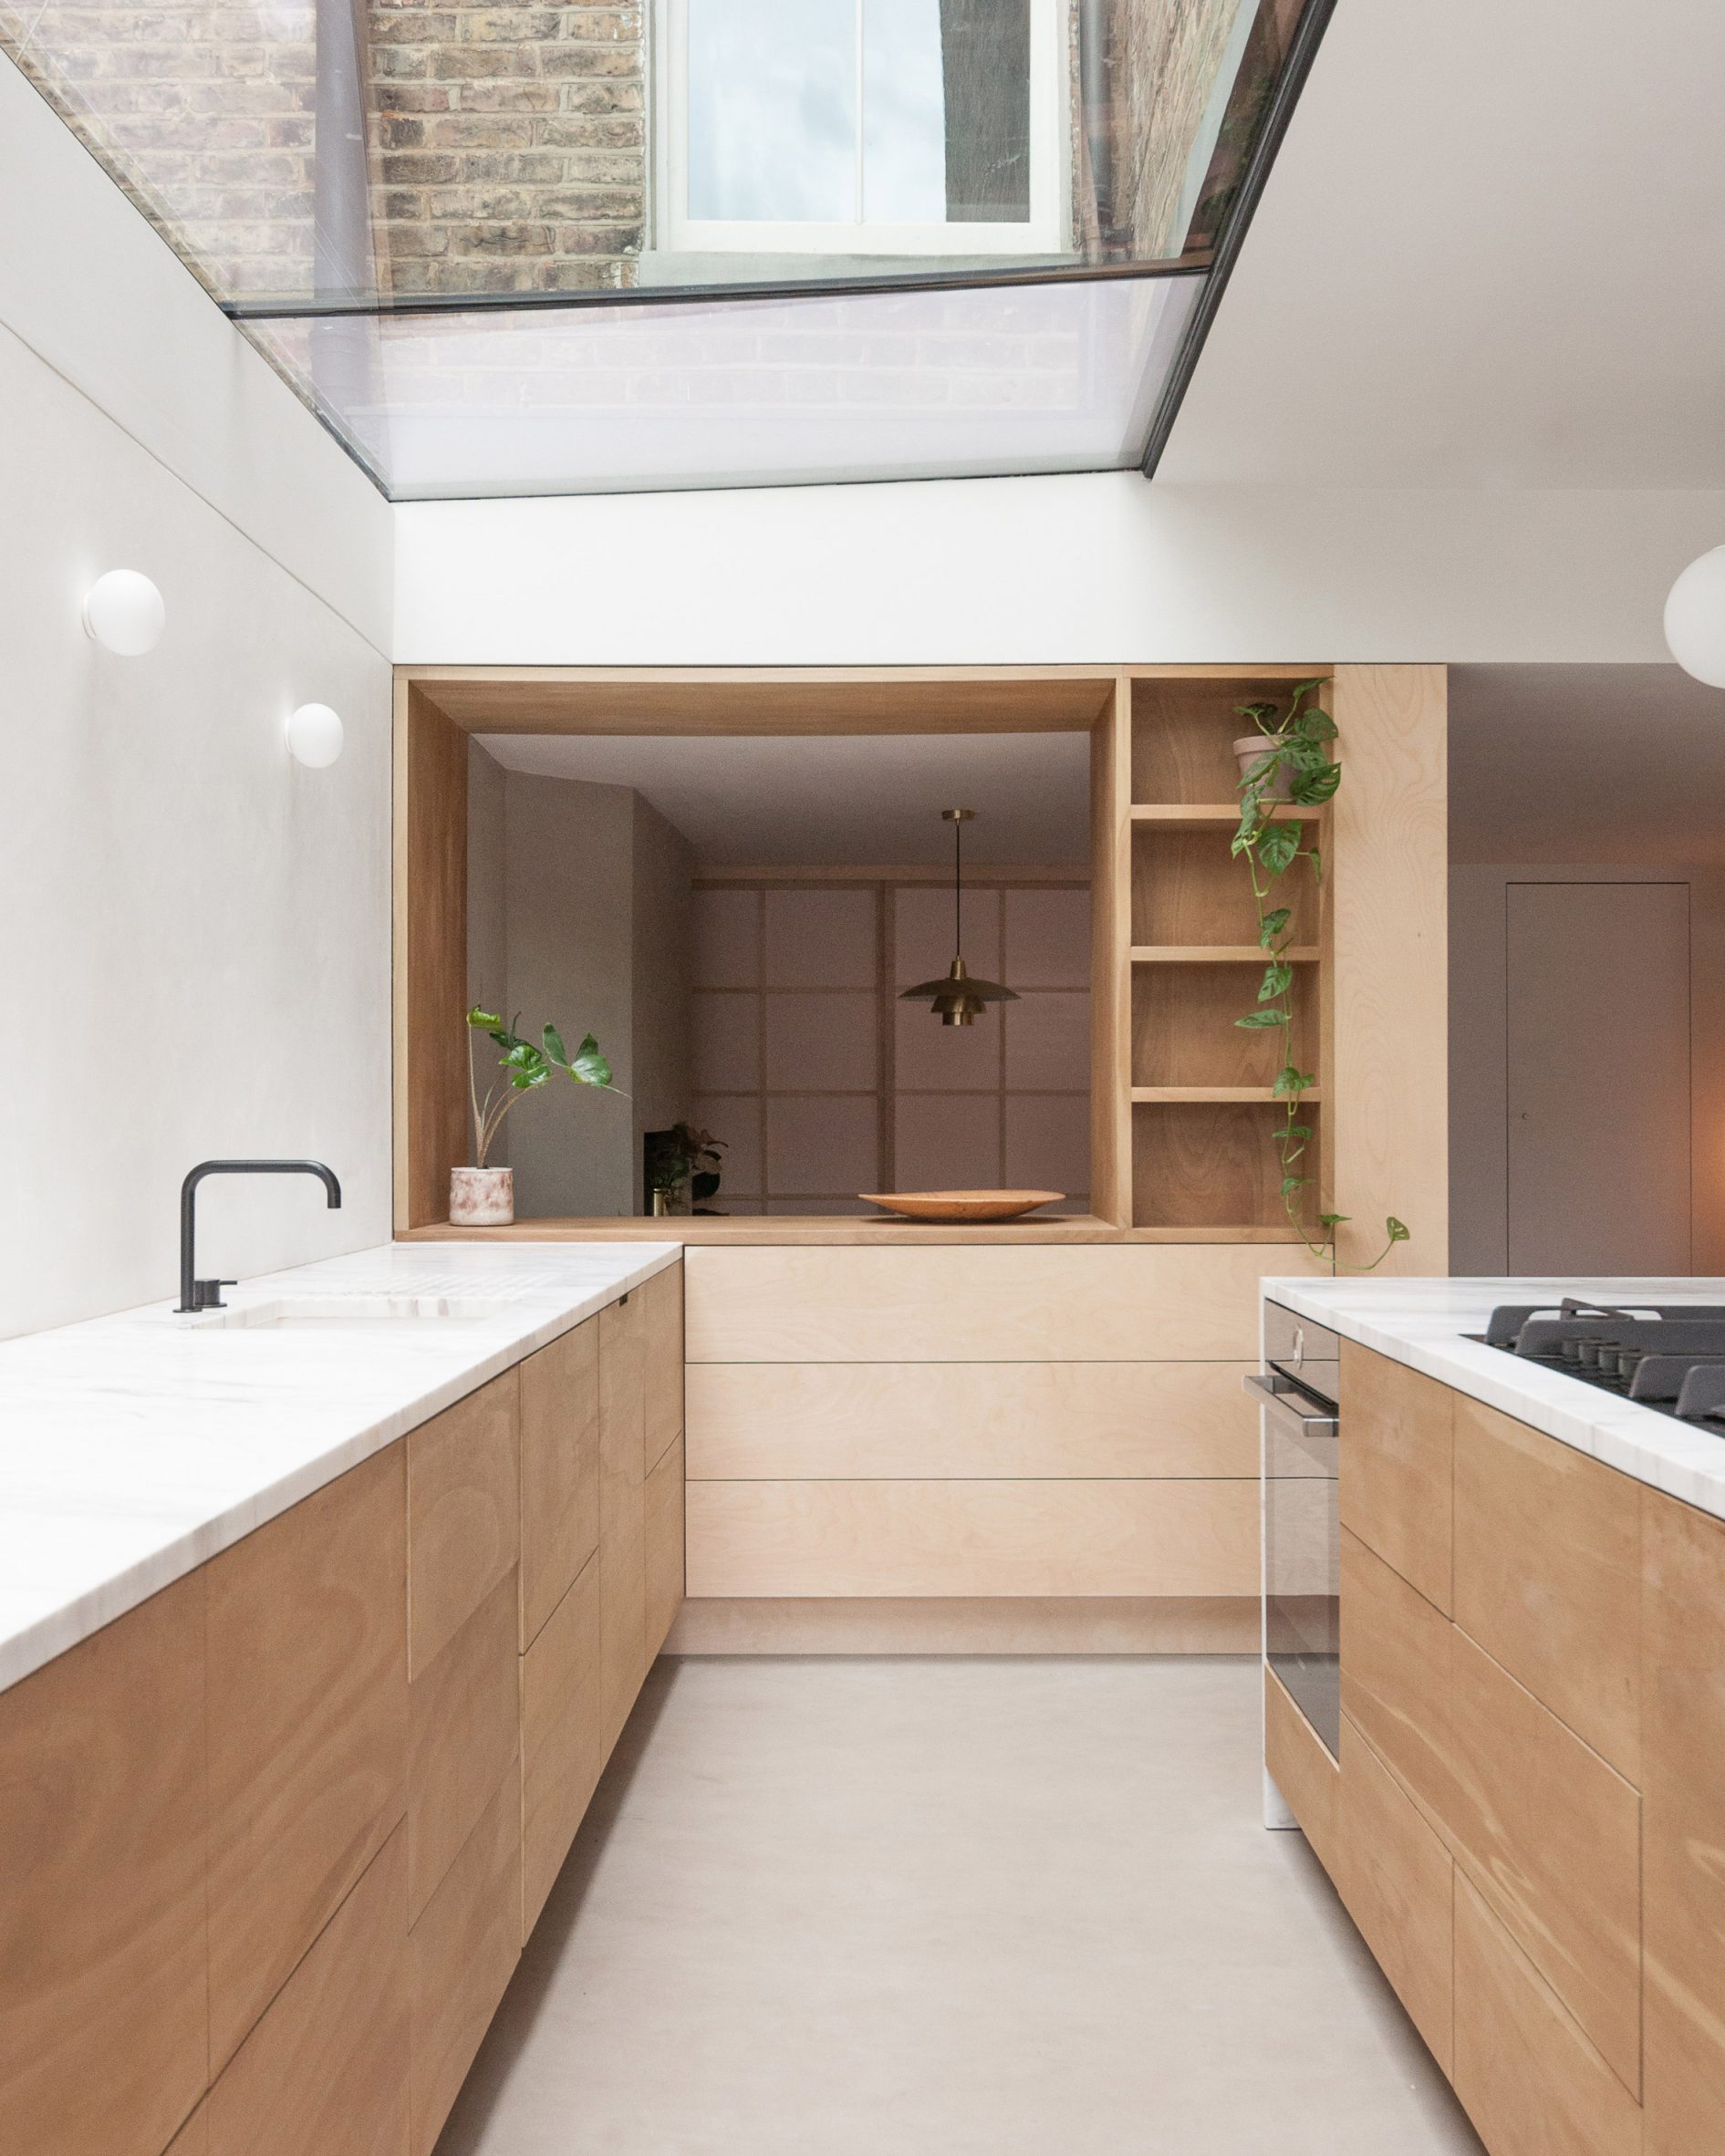 A kitchen with wooden cabinetry